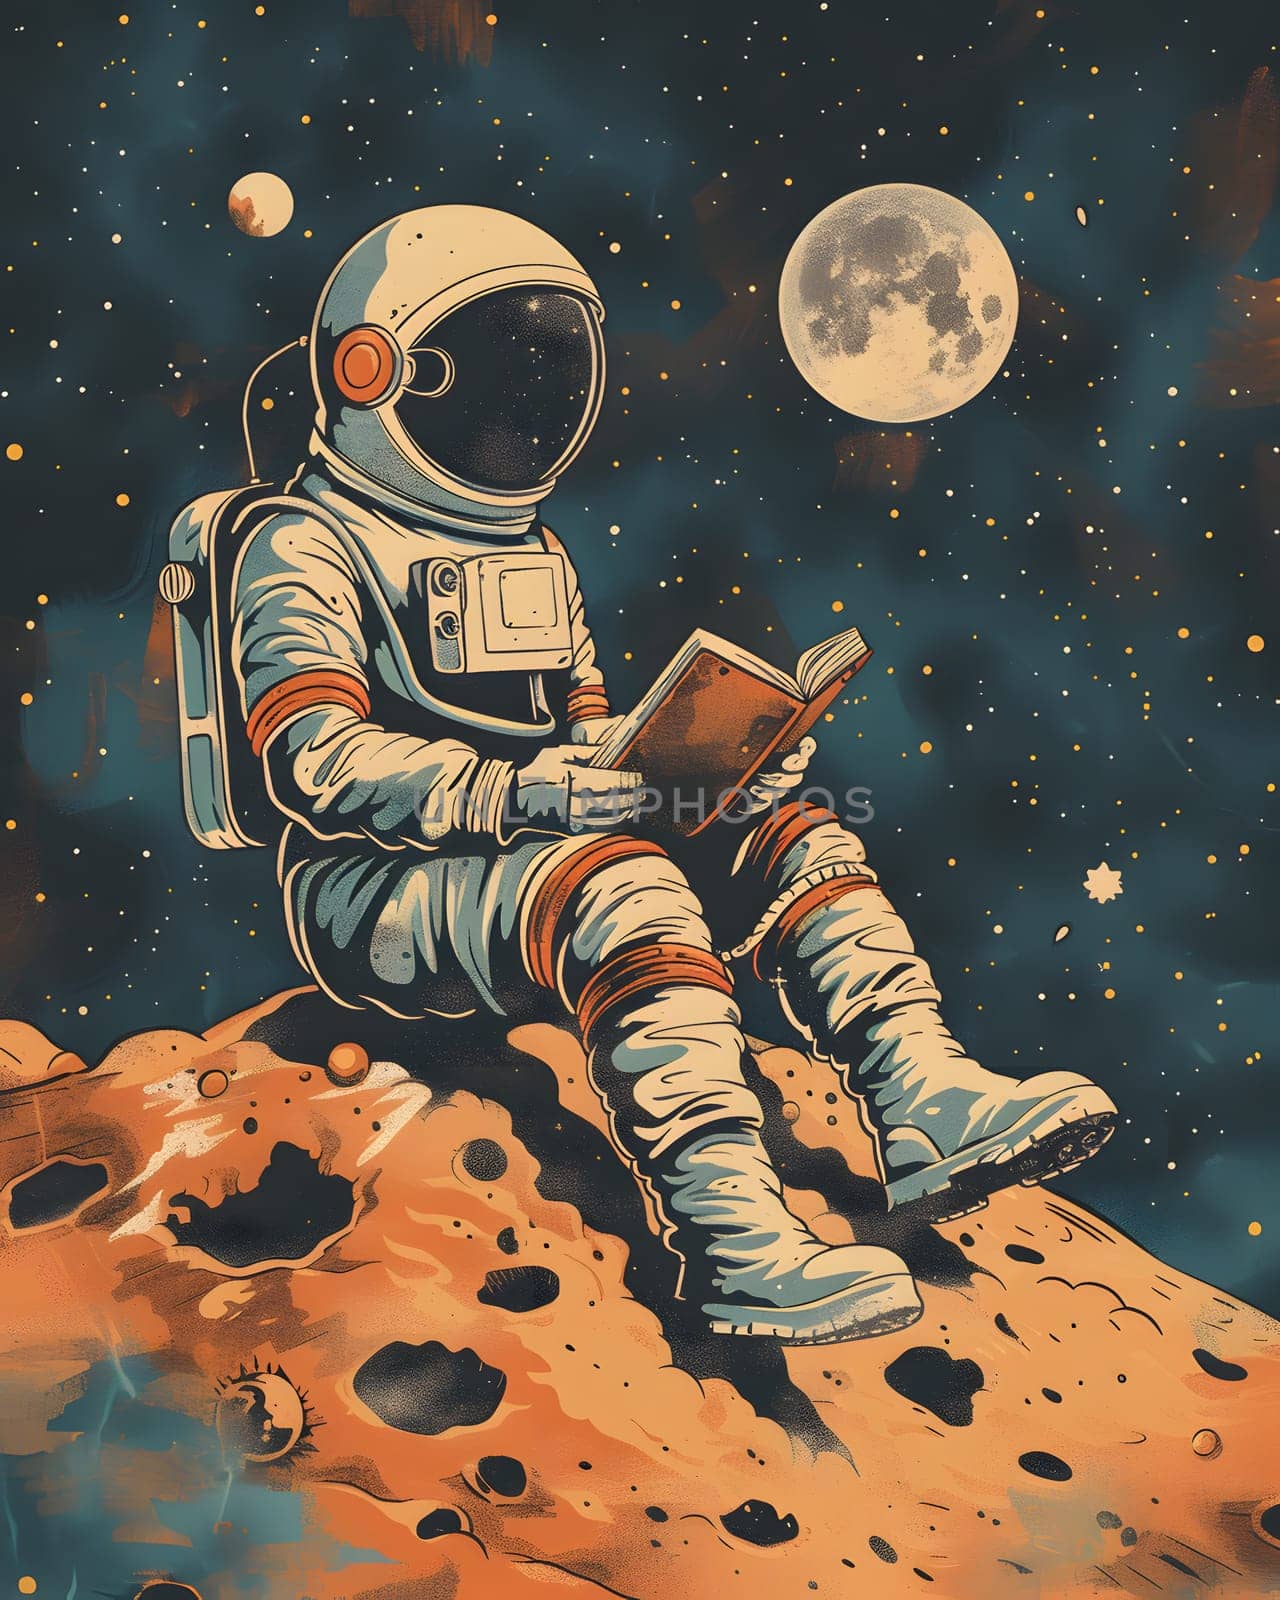 An astronaut, surrounded by astronomical objects, sits on a rock reading a book. The scene is like a painting, blending art and science in a captivating illustration of space